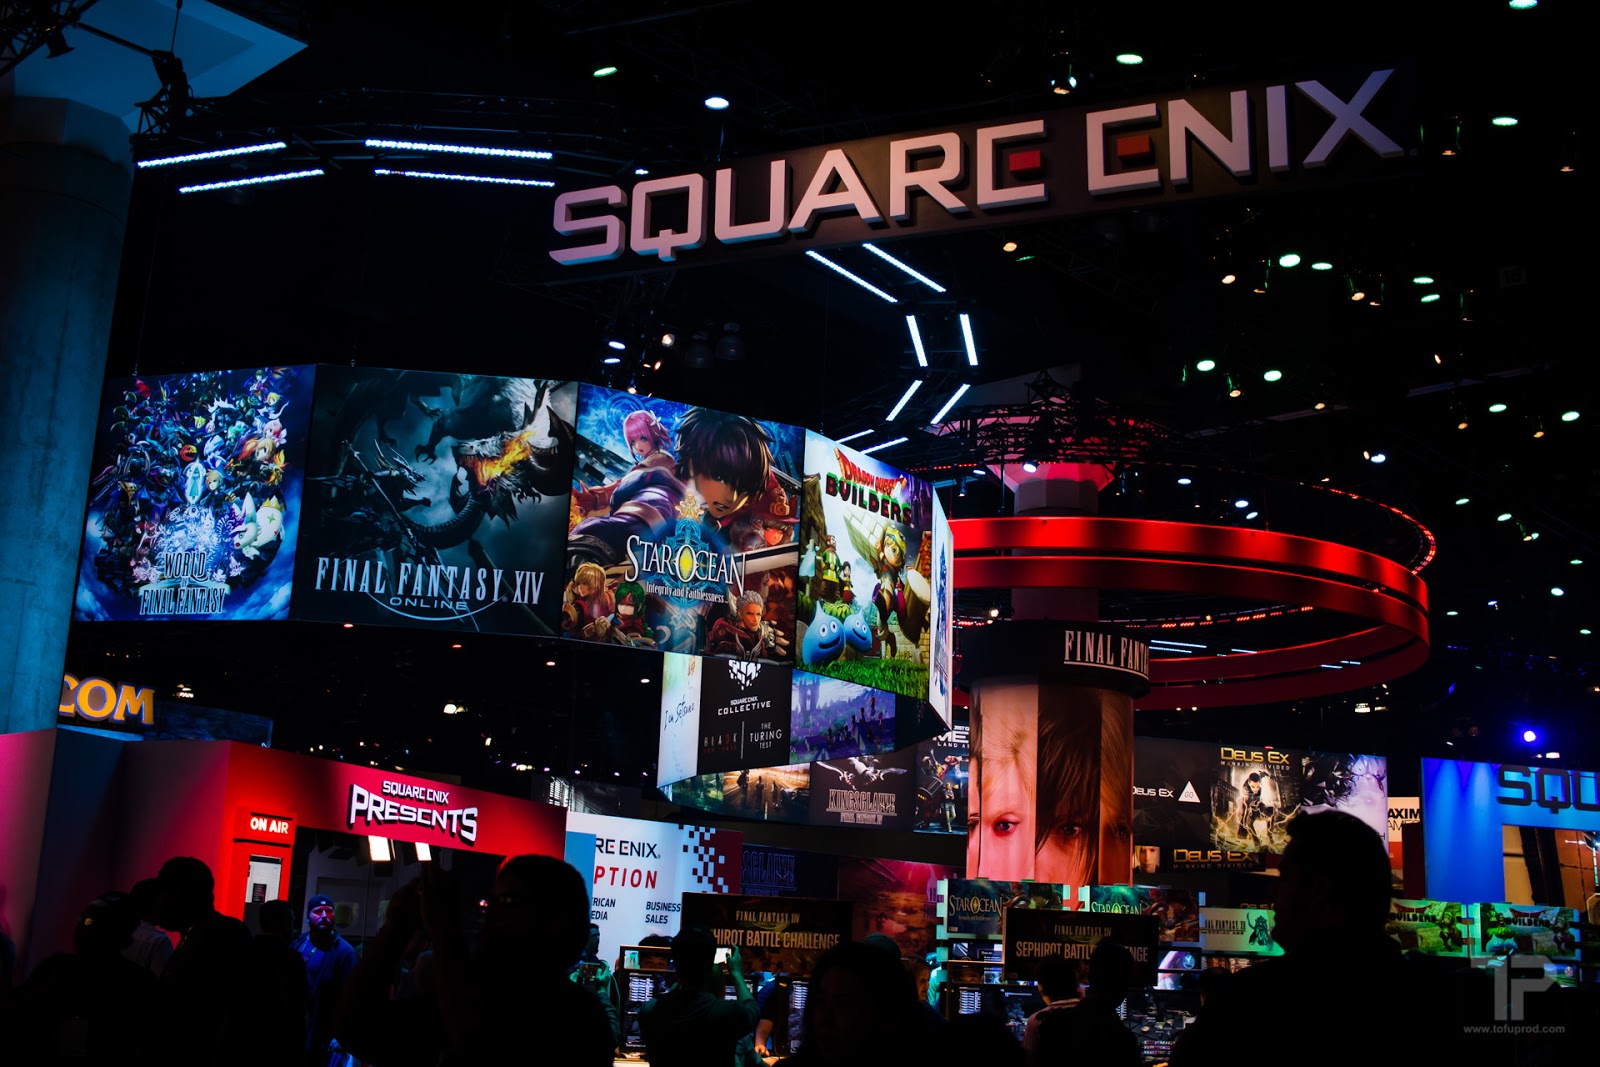 SQUARE ENIX ANNOUNCES E3 2018 LINEUP AND SHOW EVENTS - Gaming News 24h